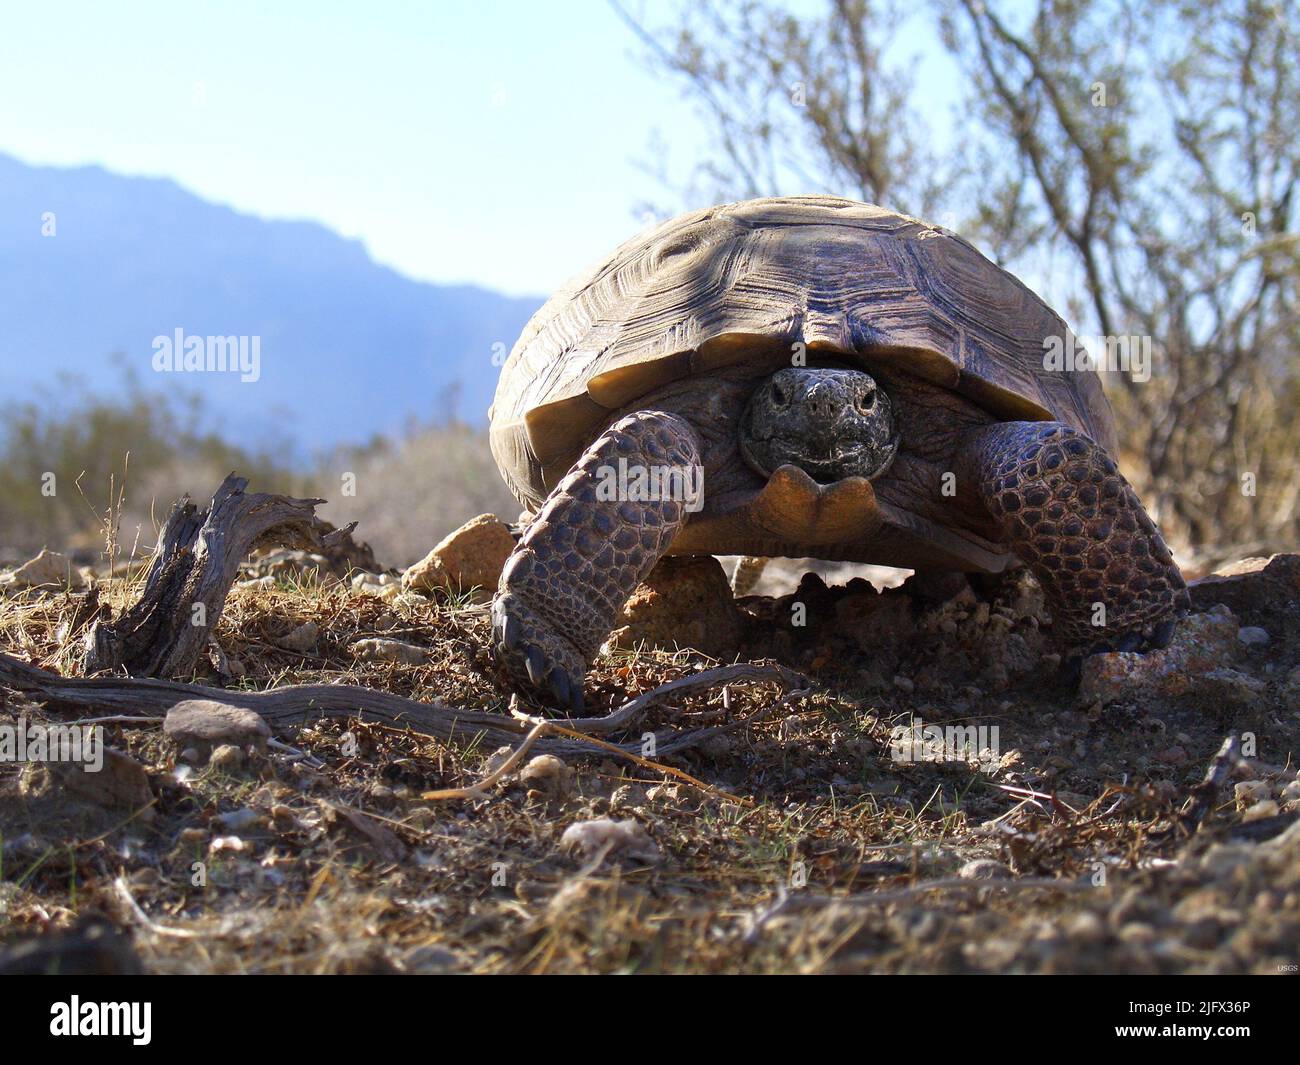 The desert tortoise (Gopherus agassizii), is a species of tortoise in the family Testudinidae. The species is native to the Mojave and Sonoran Deserts of the southwestern United States and northwestern Mexico, and to the Sinaloan thornscrub of northwestern Mexico.[G. agassizii is distributed in western Arizona, southeastern California, southern Nevada, and southwestern Utah. Credit USGS Stock Photo